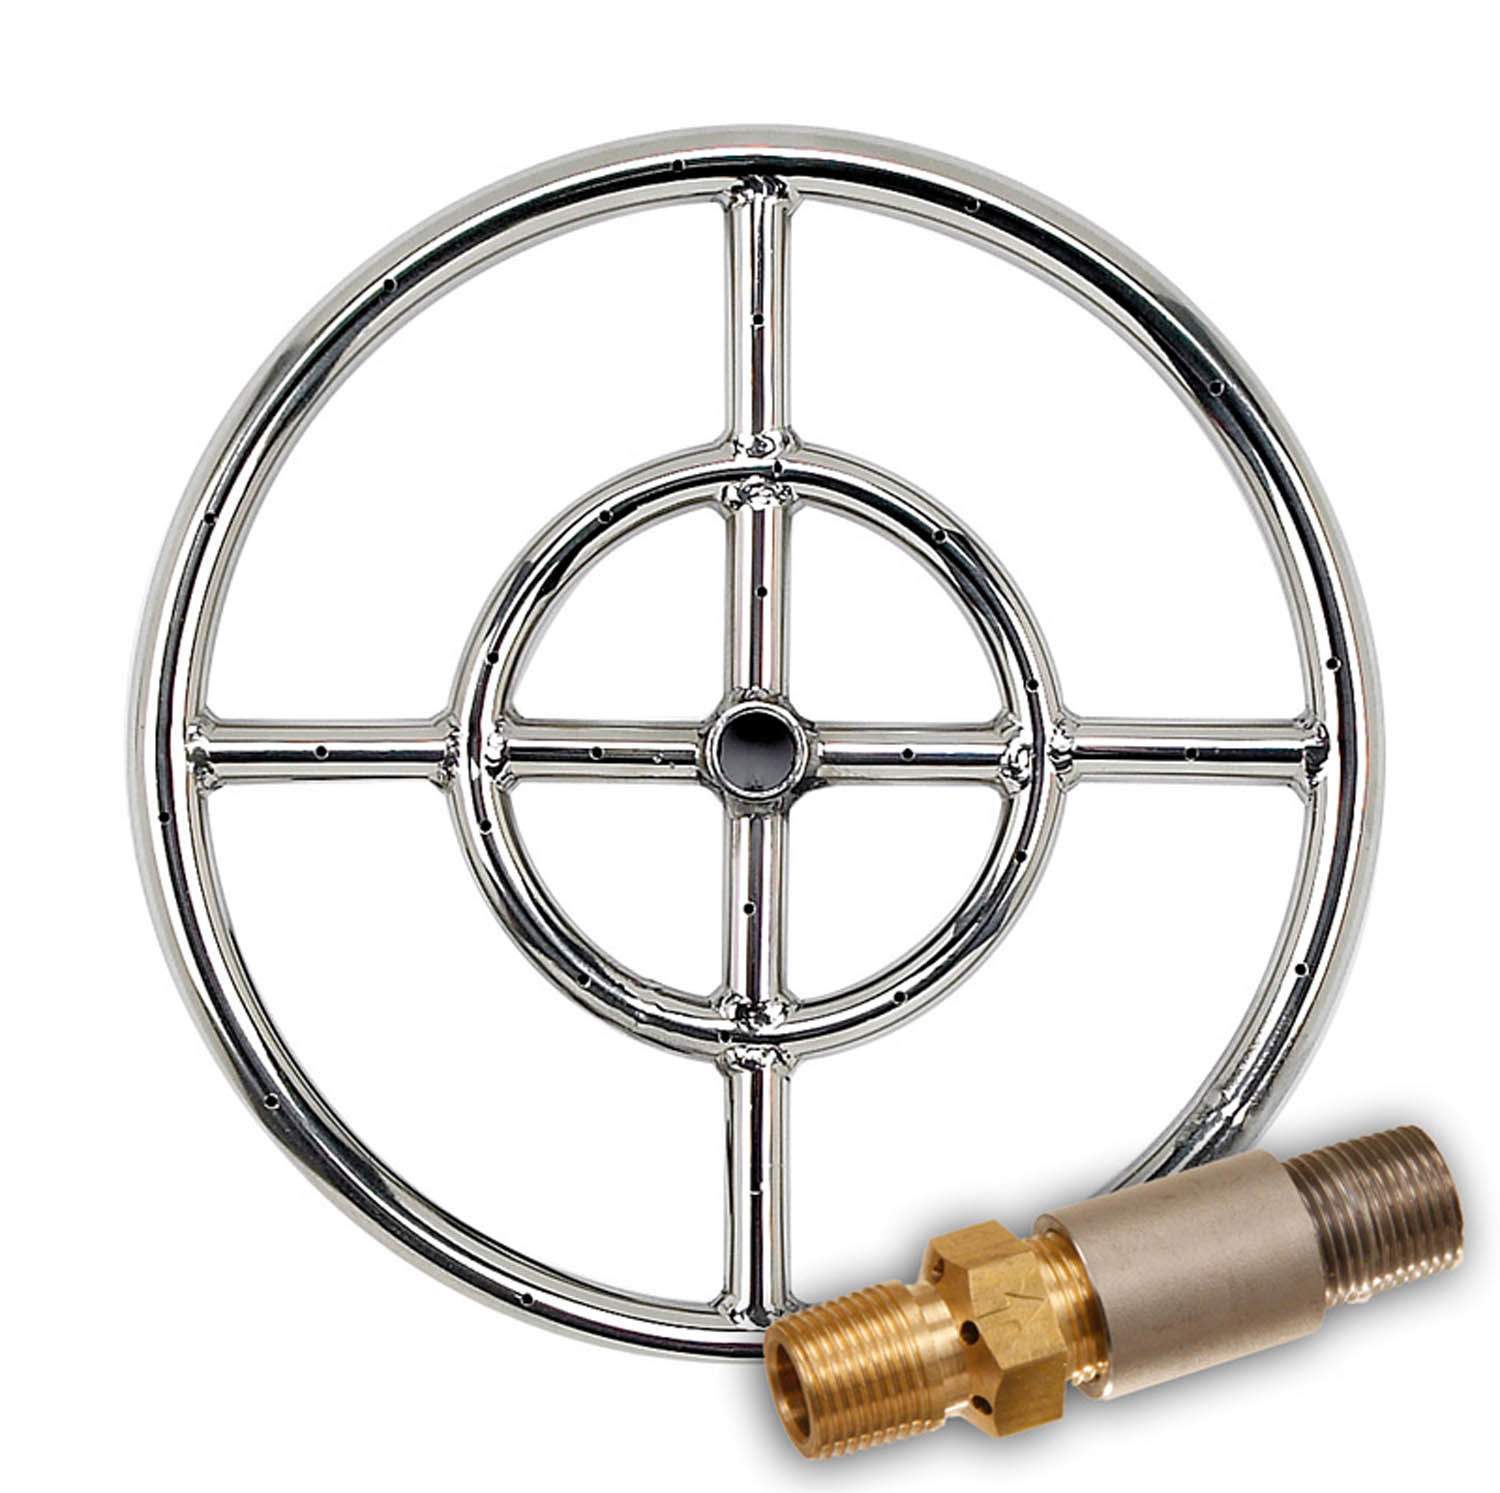 Round Propane Gas Fire Pit Burner Ring, 12Inch, New